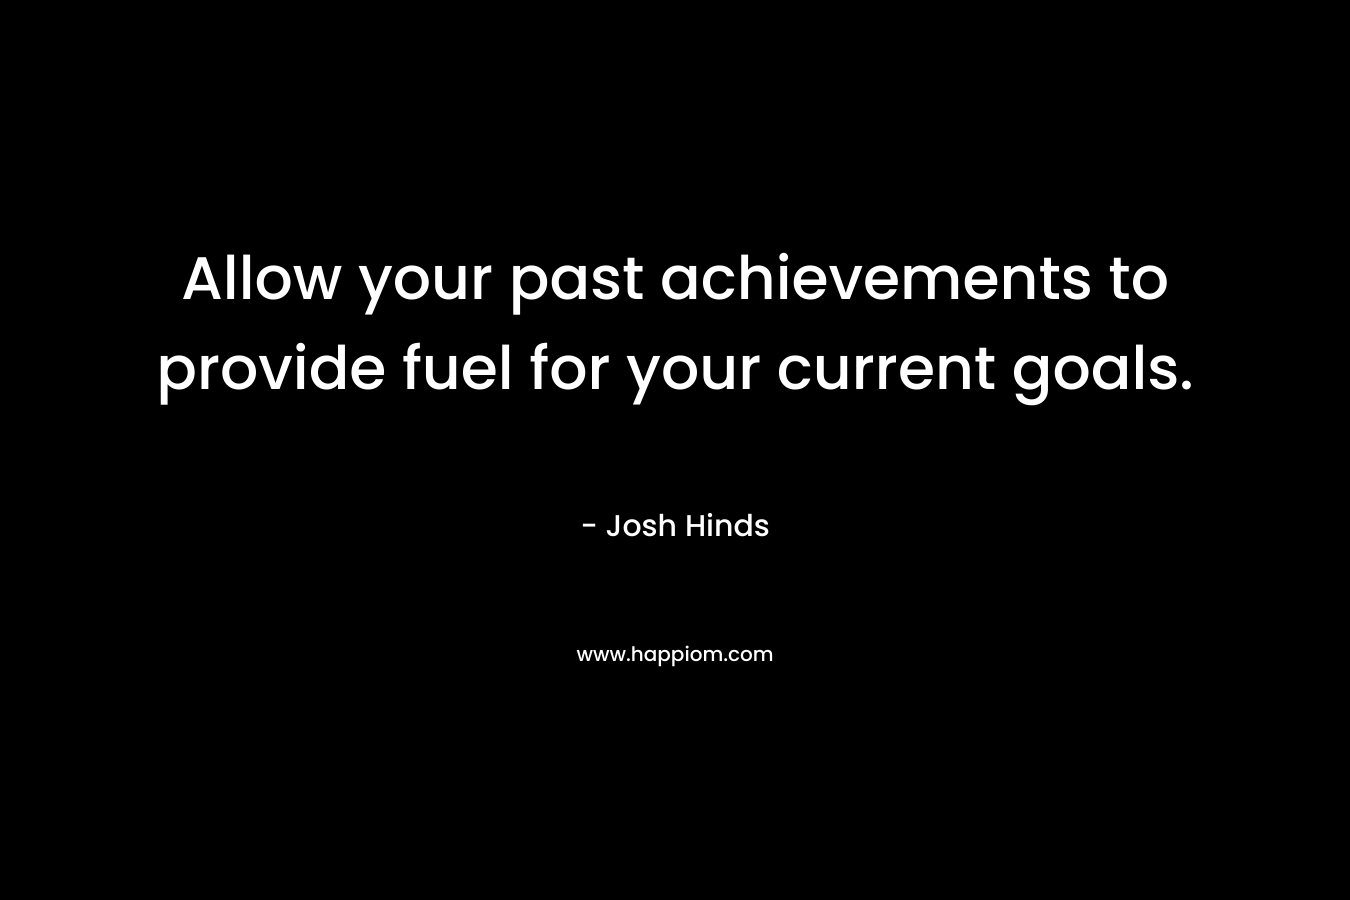 Allow your past achievements to provide fuel for your current goals. – Josh Hinds